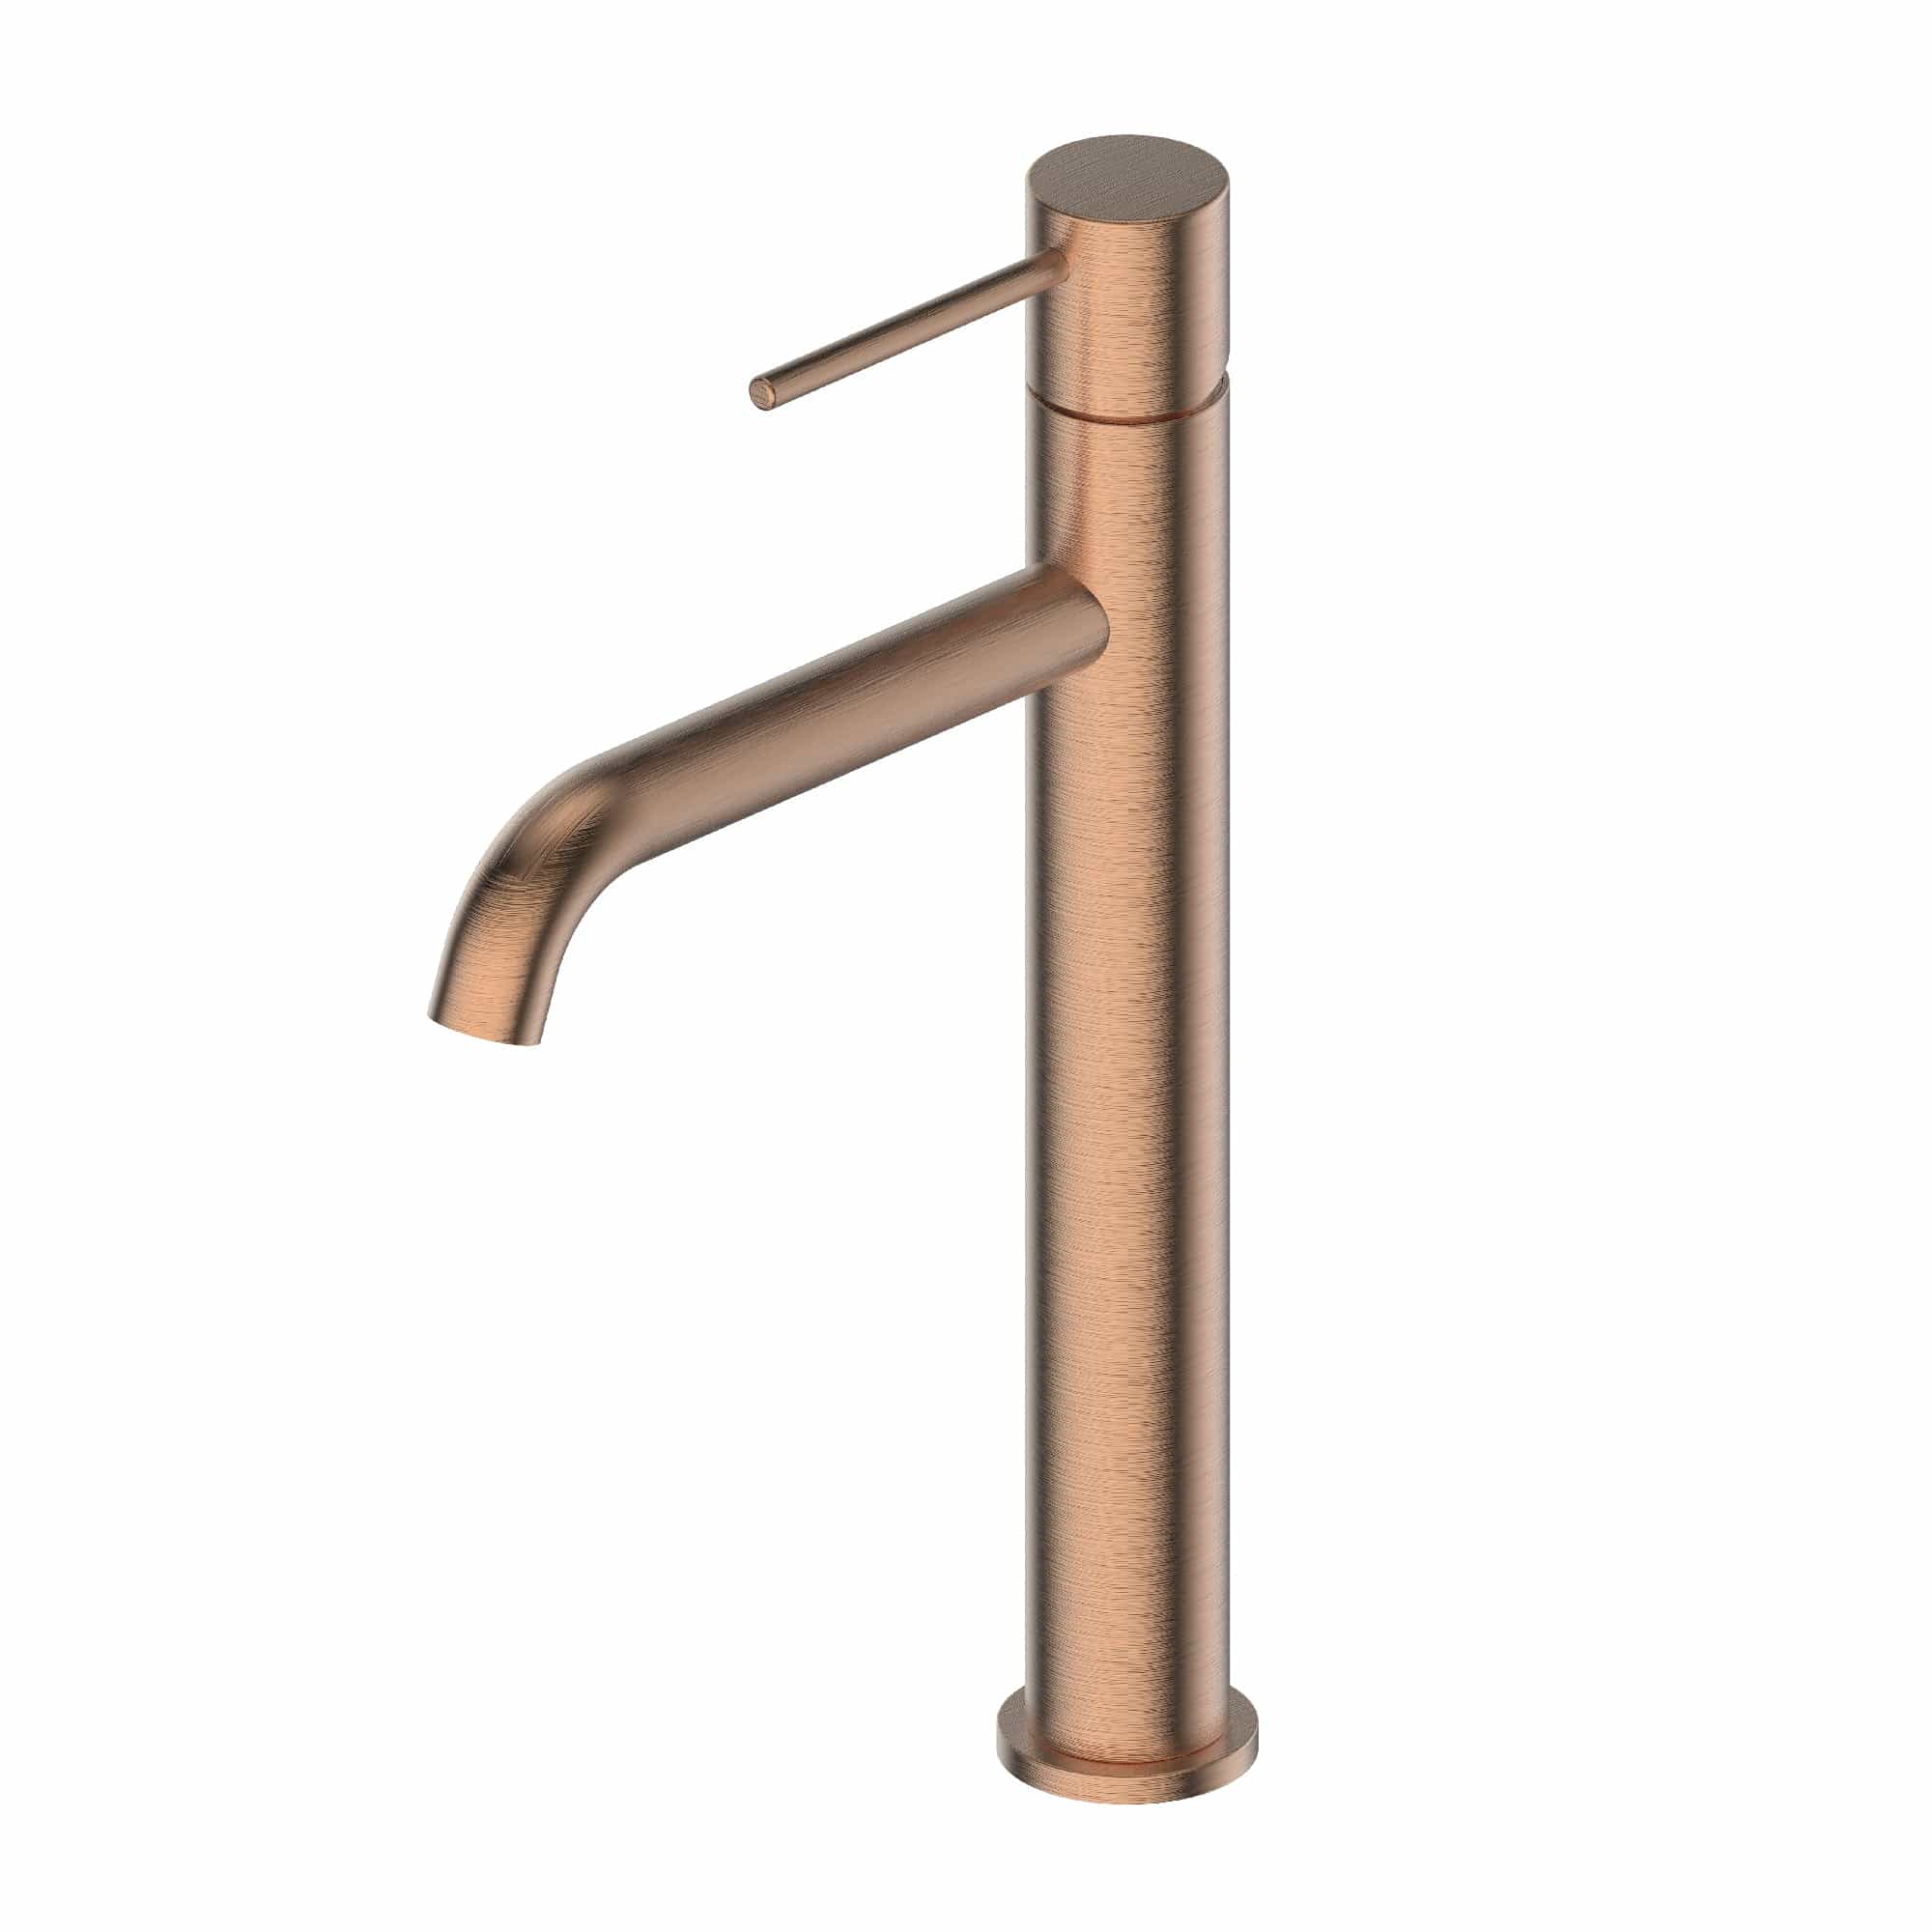 Greens Basin Tap Greens Gisele Tower Basin Mixer | Brushed Copper